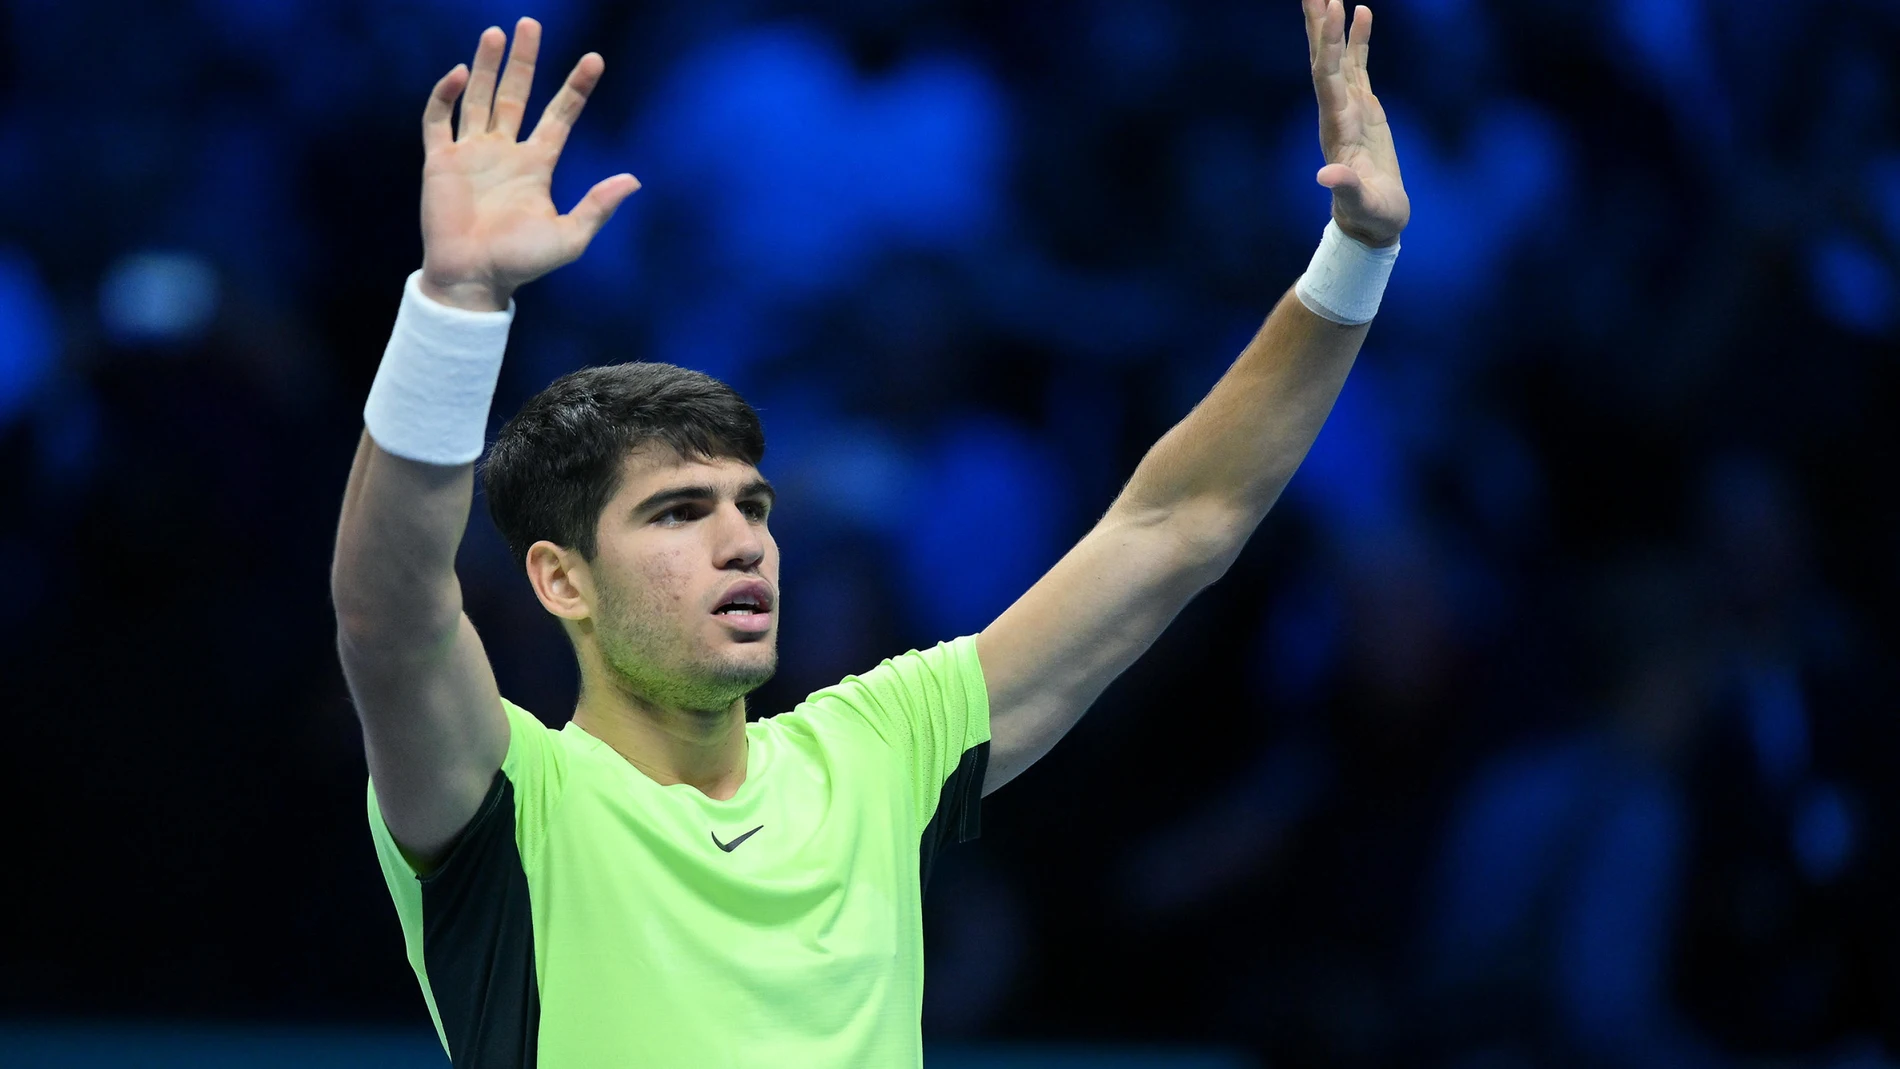 Turin (Italy), 15/11/2023.- Carlos Alcaraz of Spain celebrates after winning his round robin match against Andrey Rublev of Russia at the Nitto ATP Finals tennis tournament in Turin, Italy, 15 November 2023. (Tenis, Italia, Rusia, España) EFE/EPA/ALESSANDRO DI MARCO 